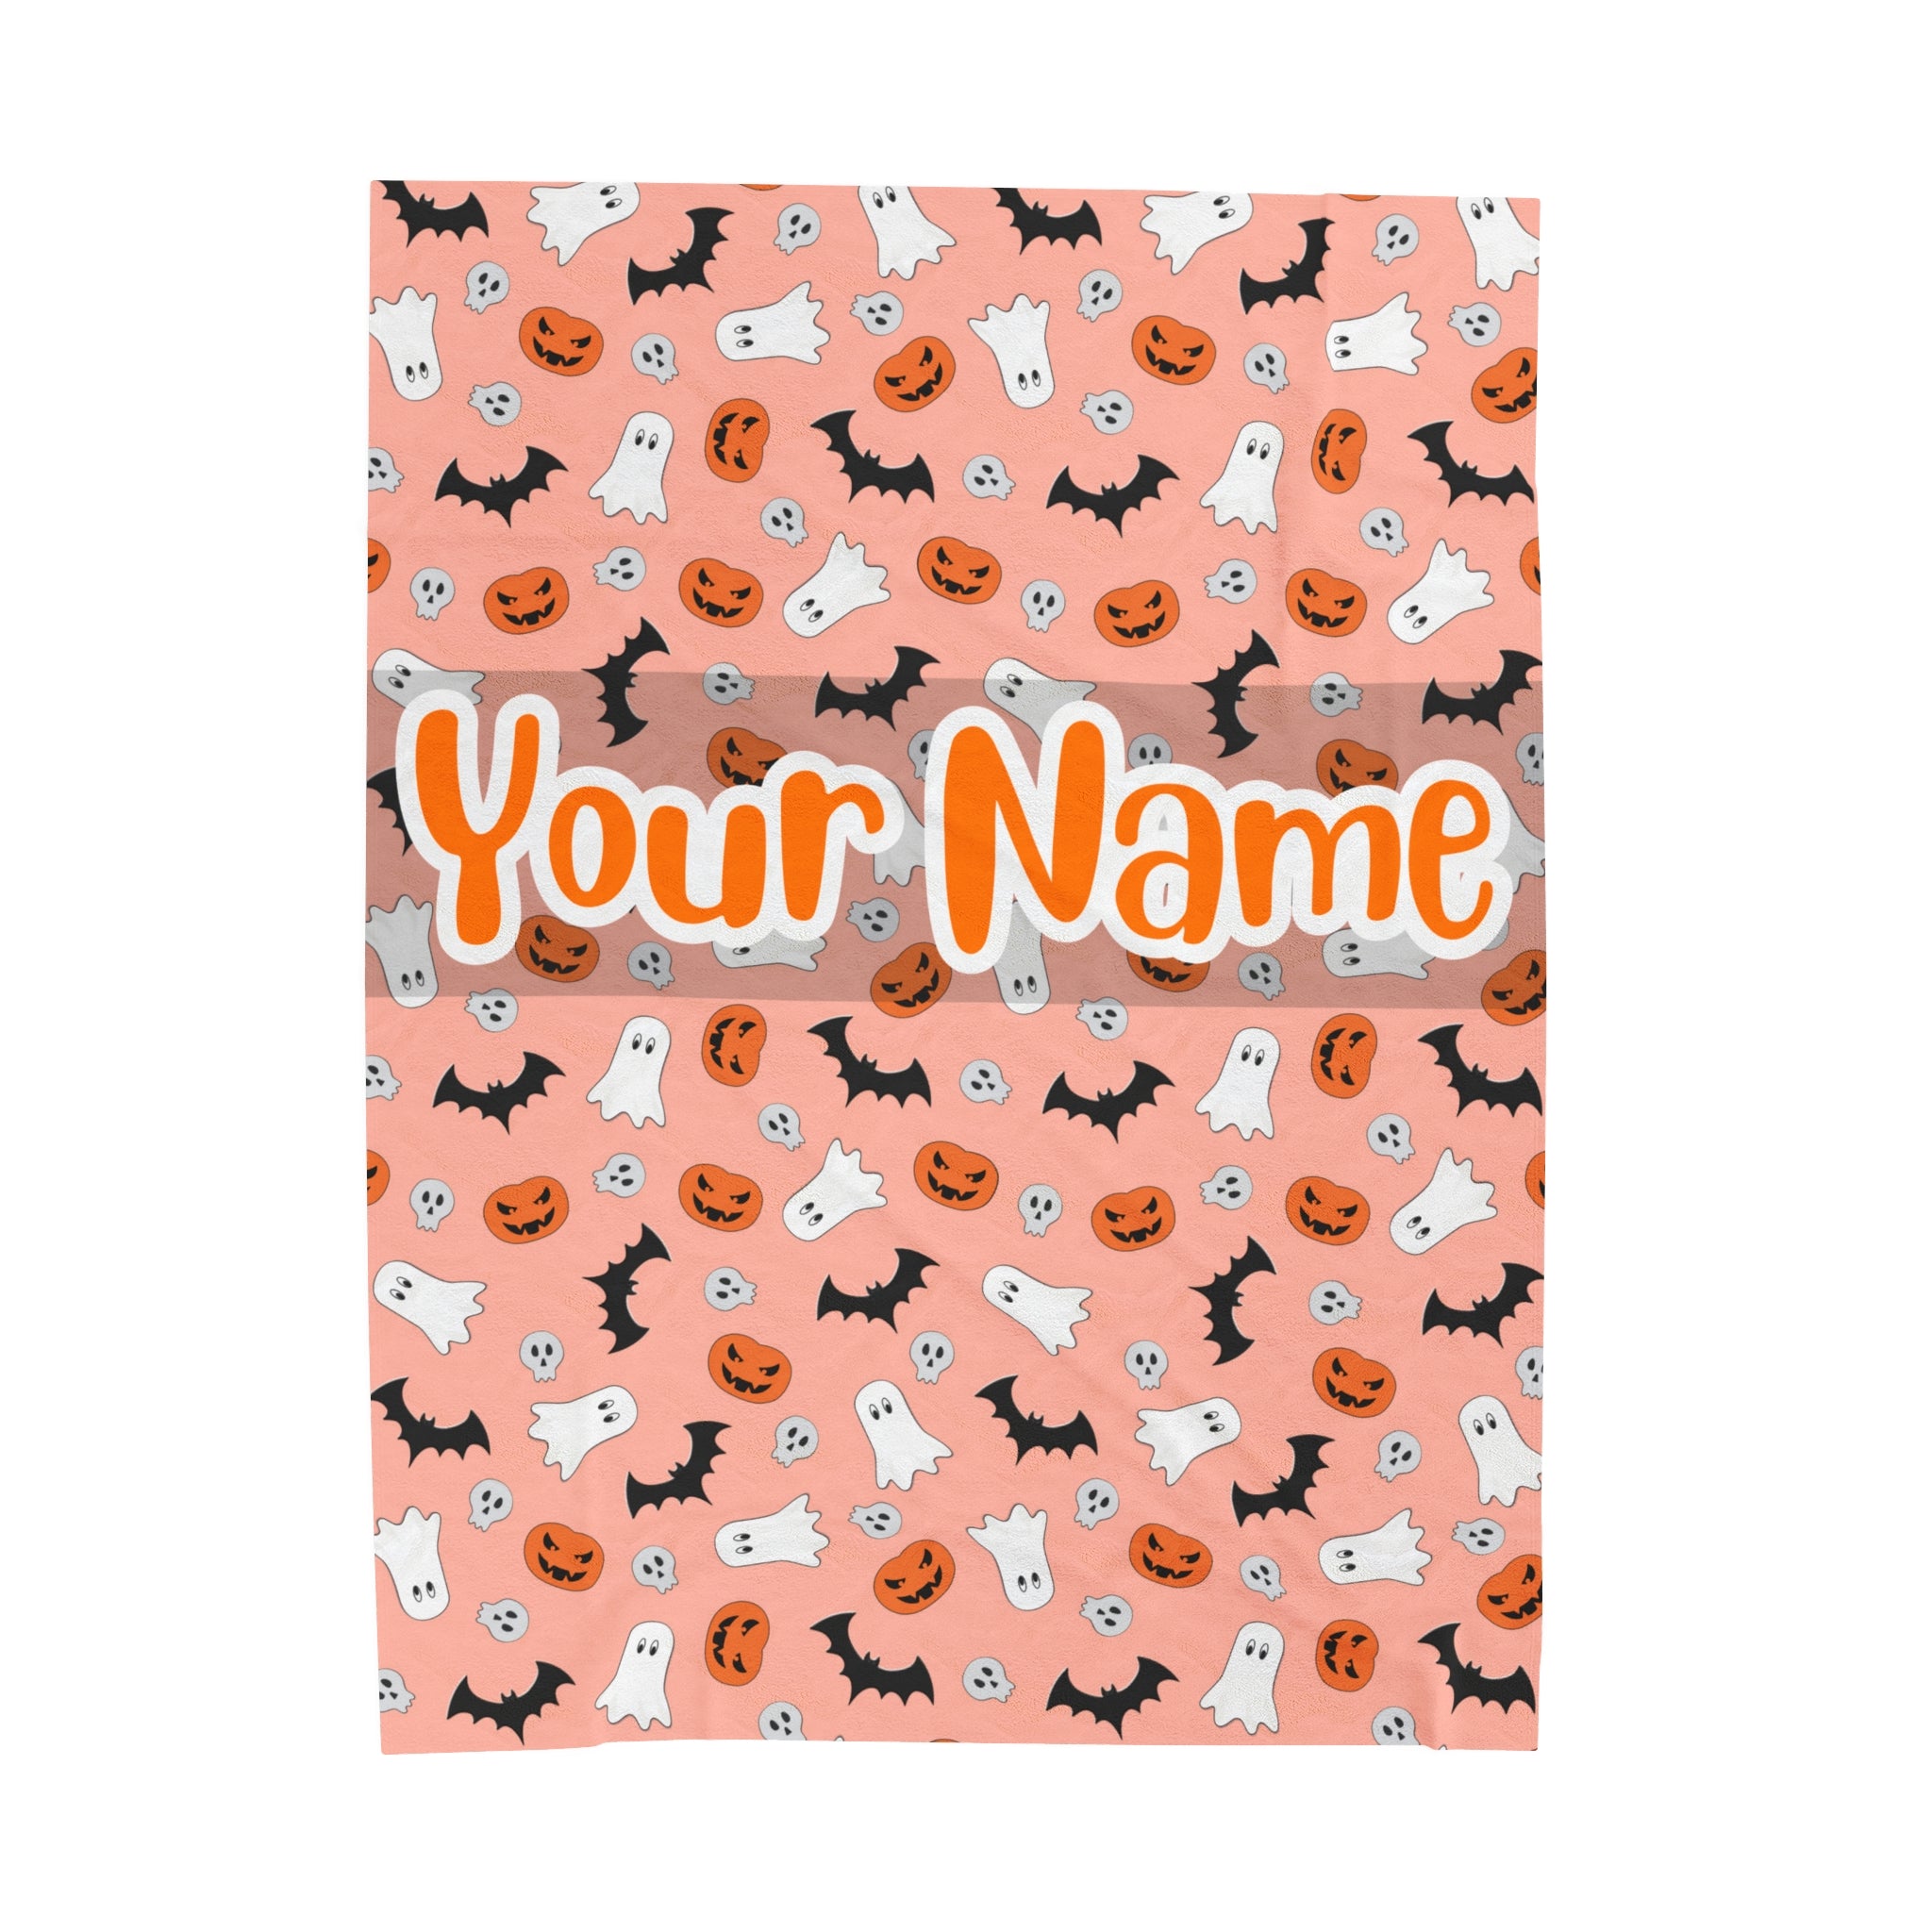 Funny Halloween #7 Custom Blanket with Name - Personalized Blanket